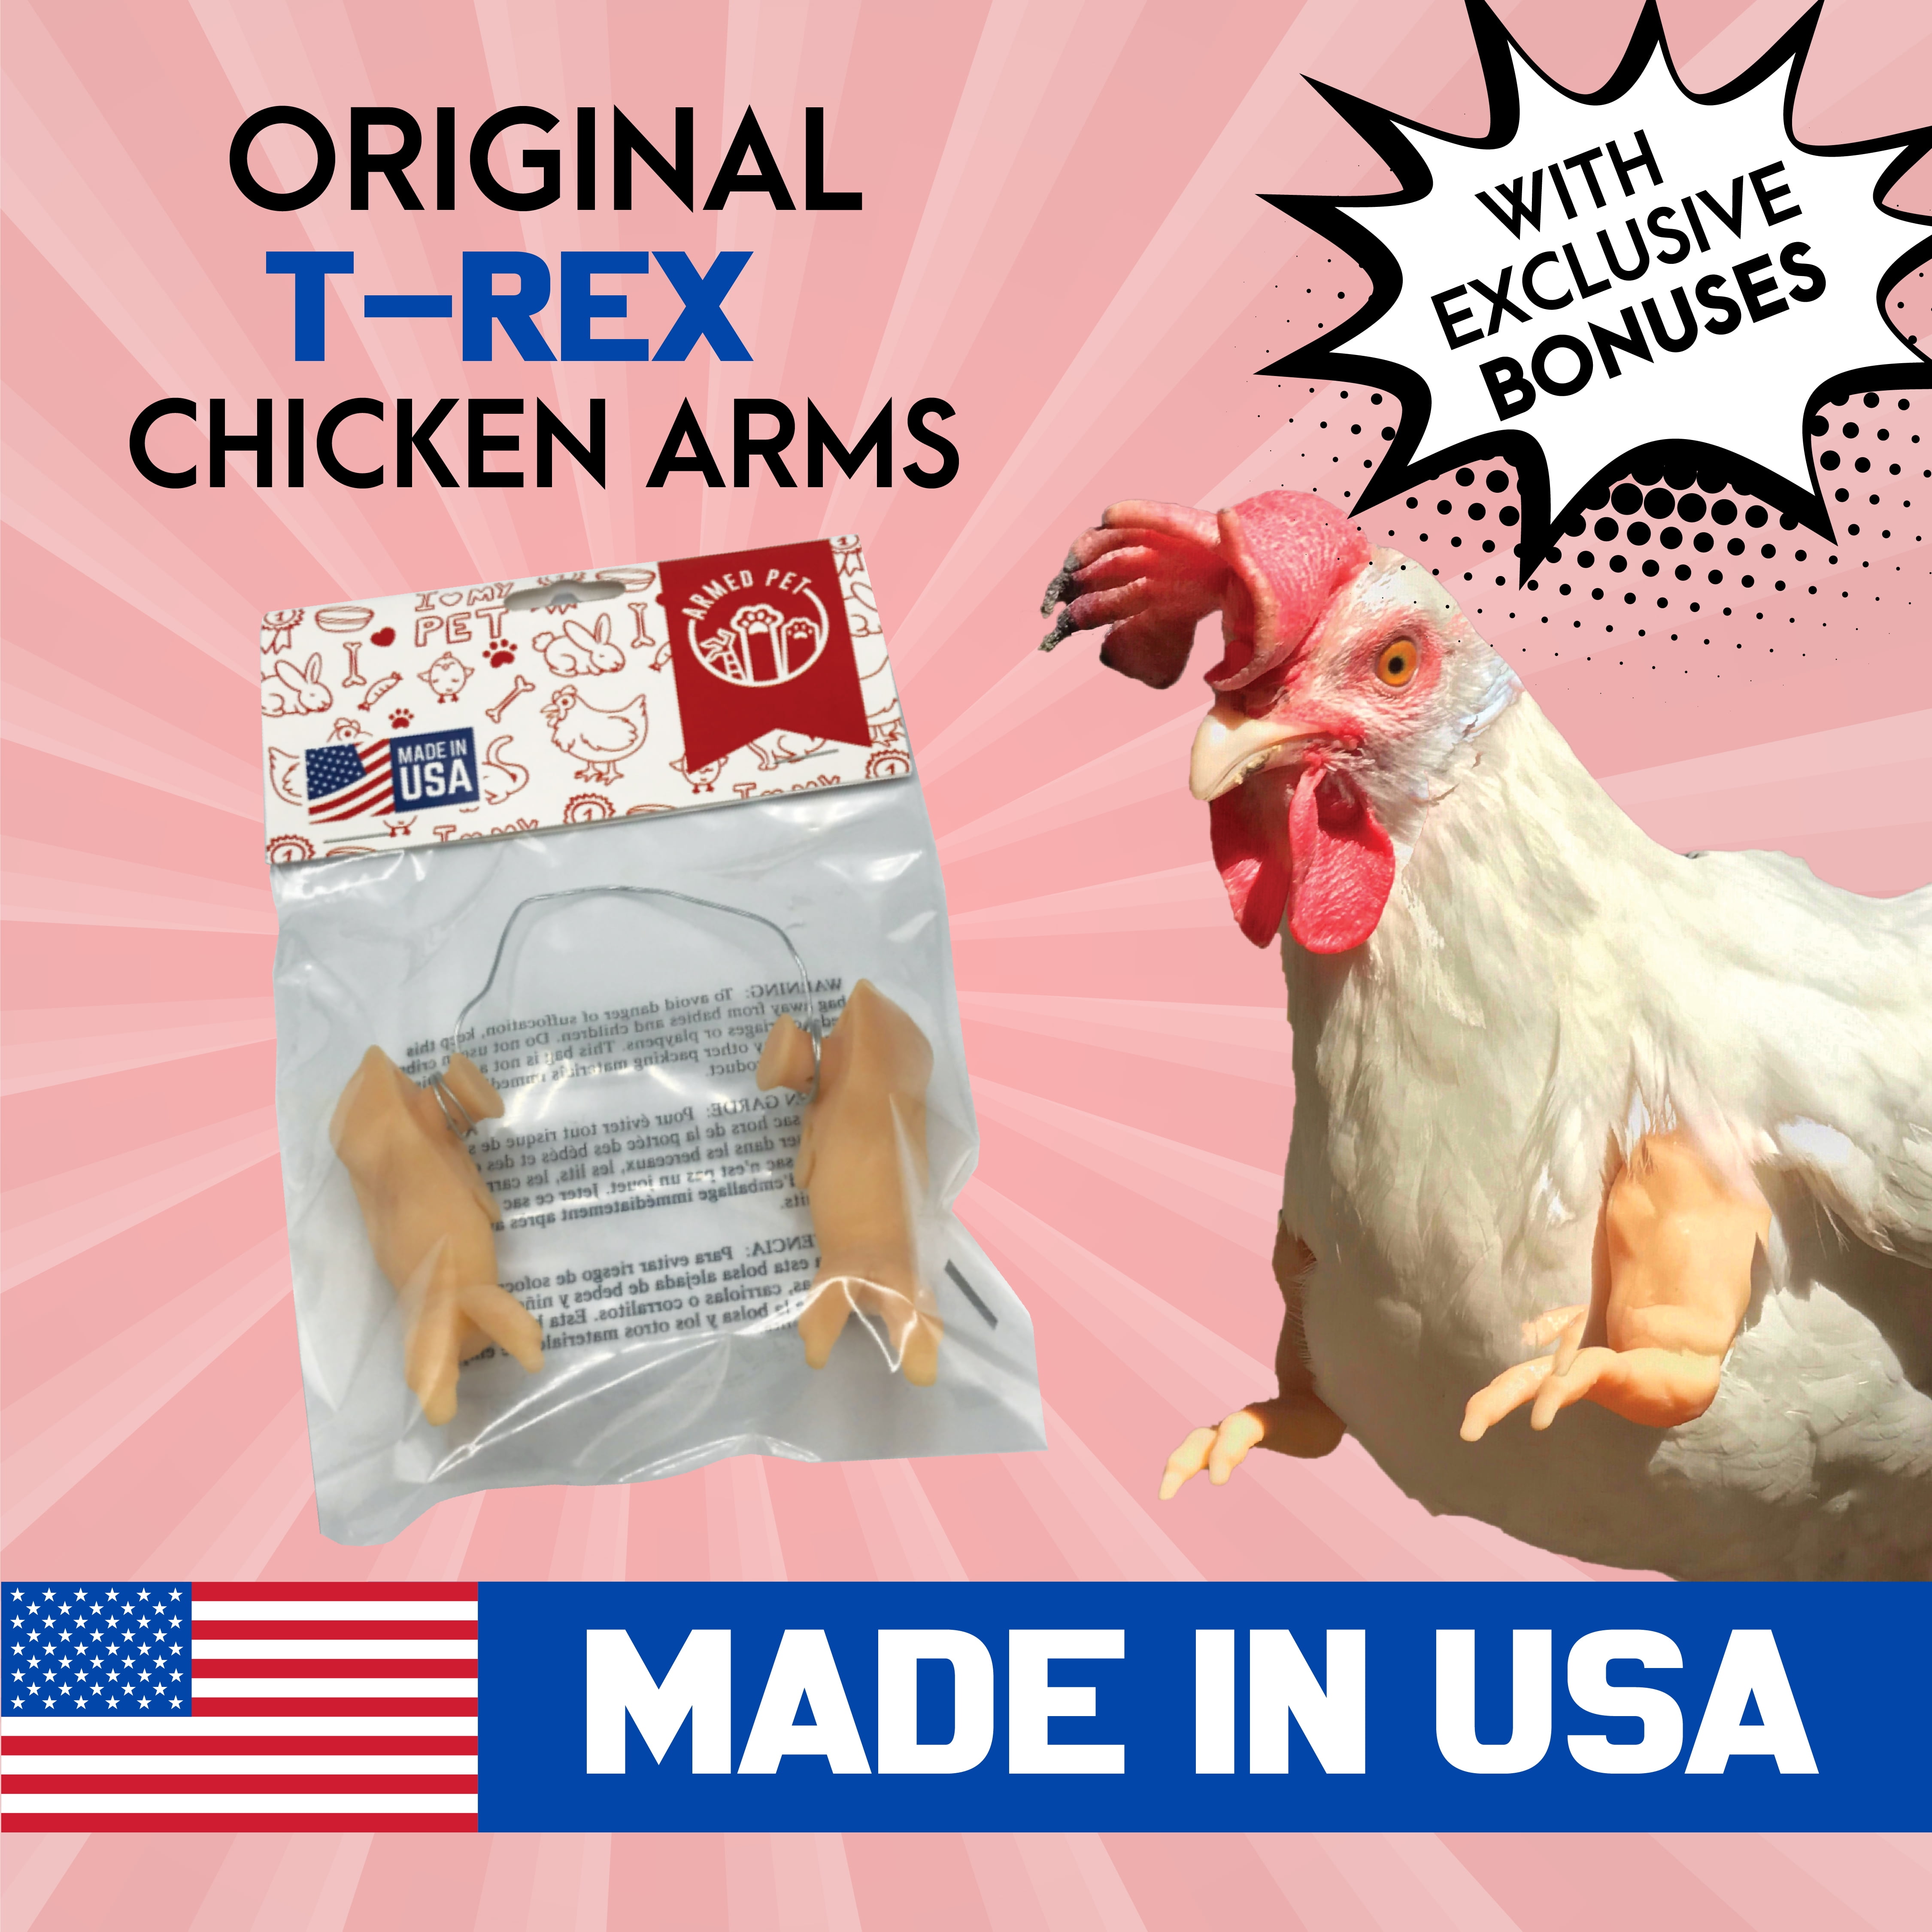 Tiny 3D Printed Baby Arms for Chickens That Bring the 'Birds With Arms'  Meme to Real Life